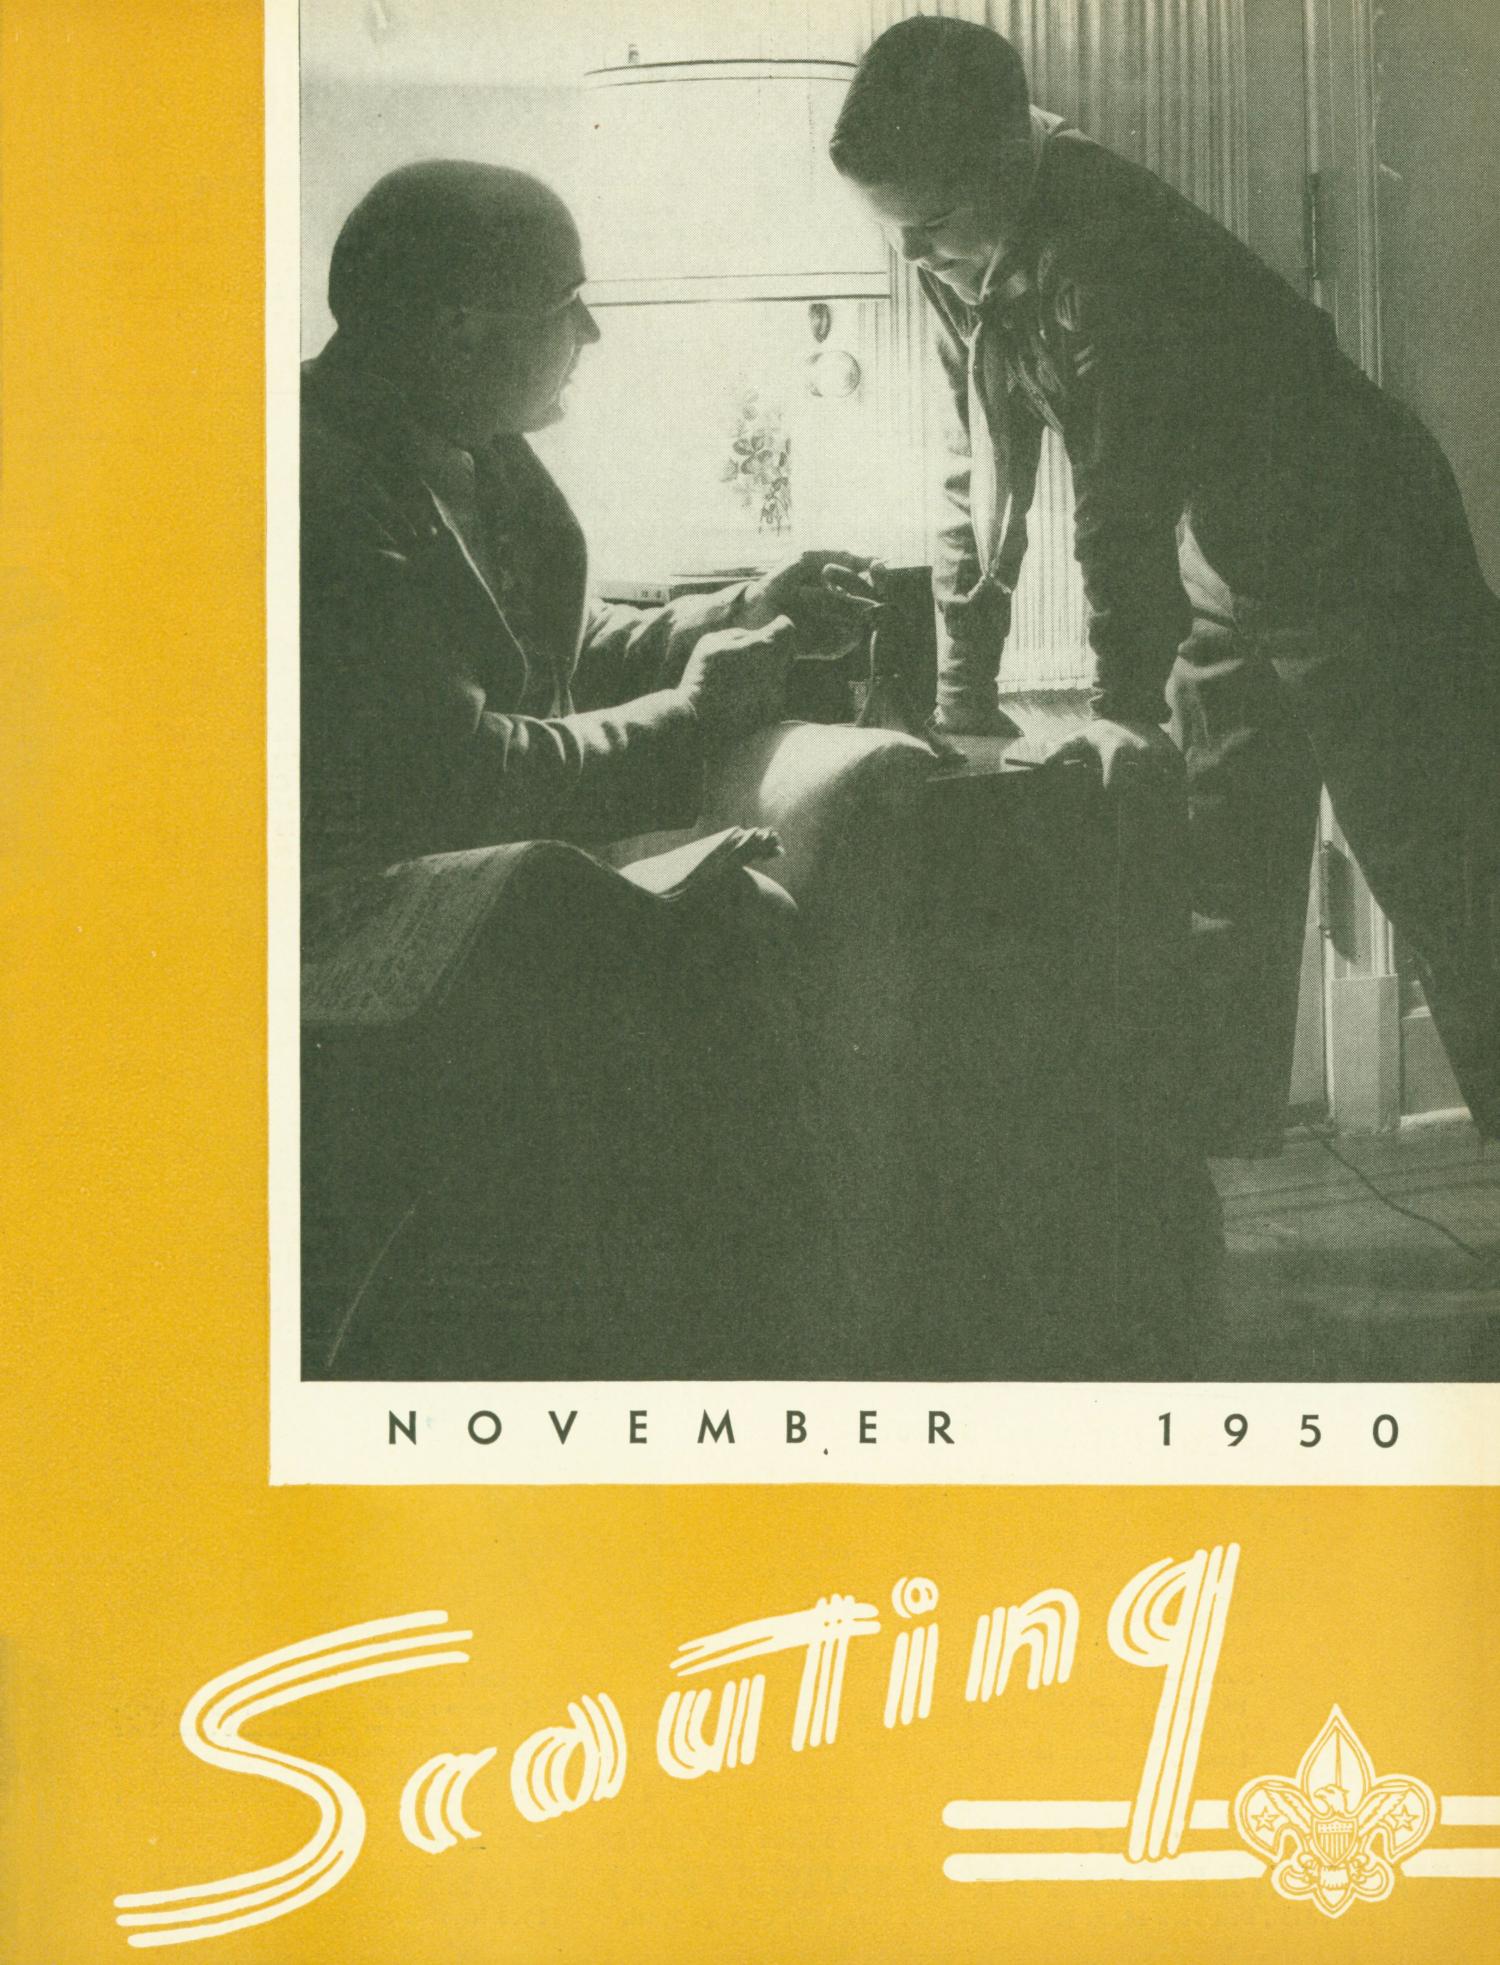 Scouting, Volume 38, Number 9, November 1950
                                                
                                                    Front Cover
                                                